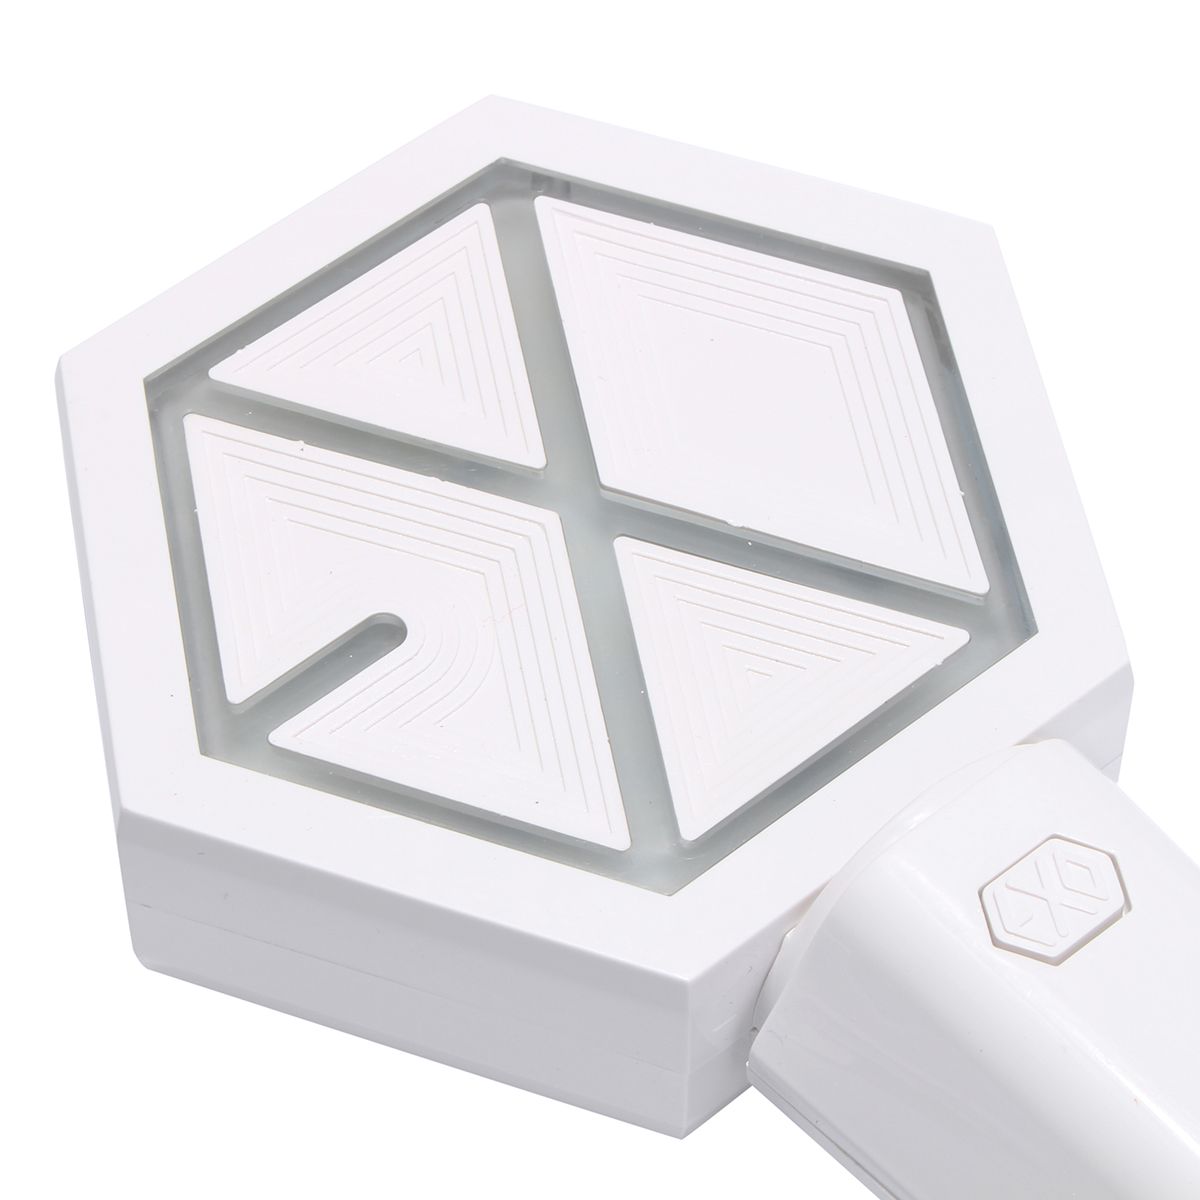 Concert-Ver-20-Lamp-Glow-Lightstick-Gifts-Decorations-For-KPOP-EXO-Chanyeol-DO-Sehun-1537329